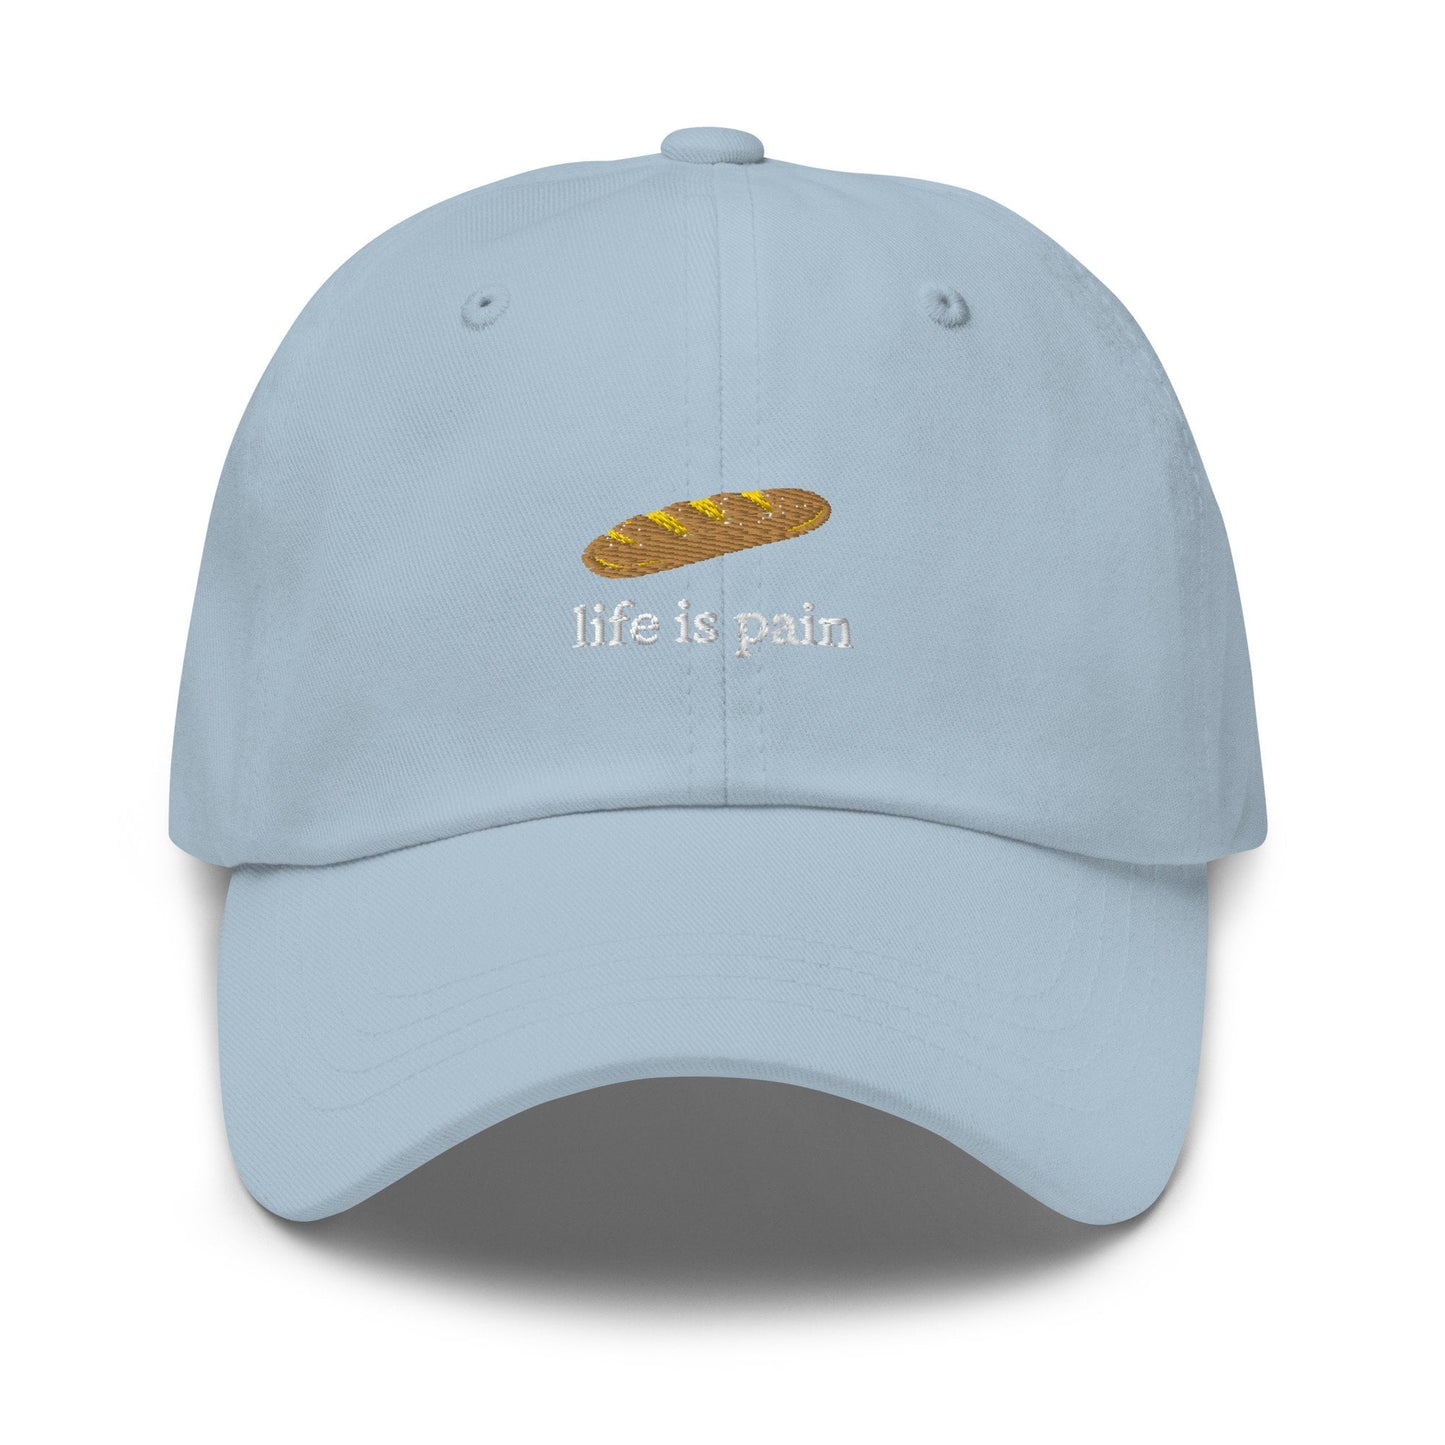 Life Is Pain Hat - French Bread - Bread is Life - Cotton Embroidered Baseball Cap - Multiple Colors